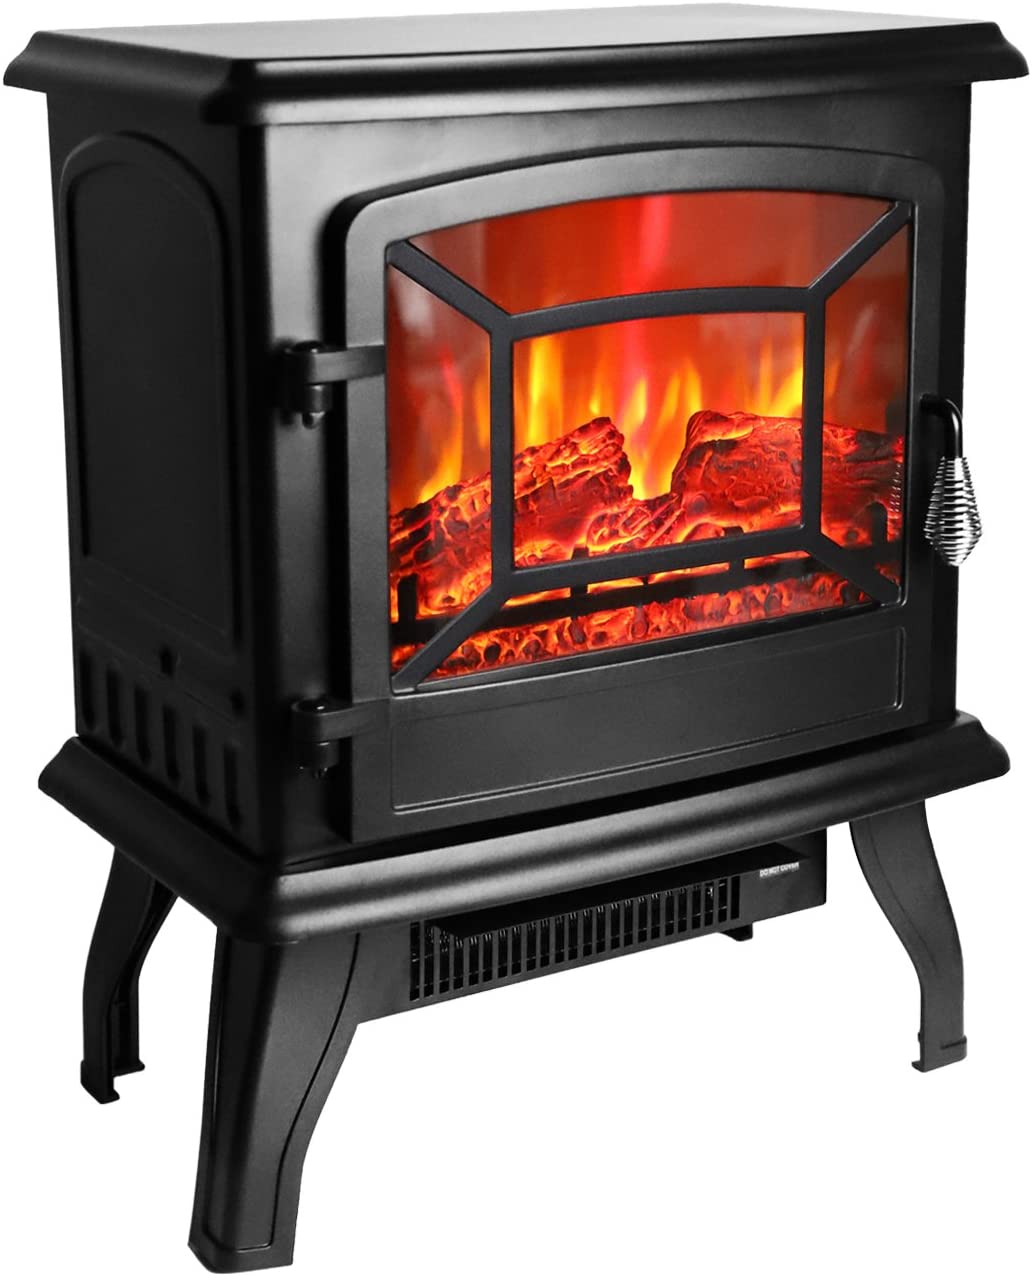 Portable Indoor Fireplace Beautiful Rovsun 20"h Electric Fireplace Stove Adjustable 1400w Space